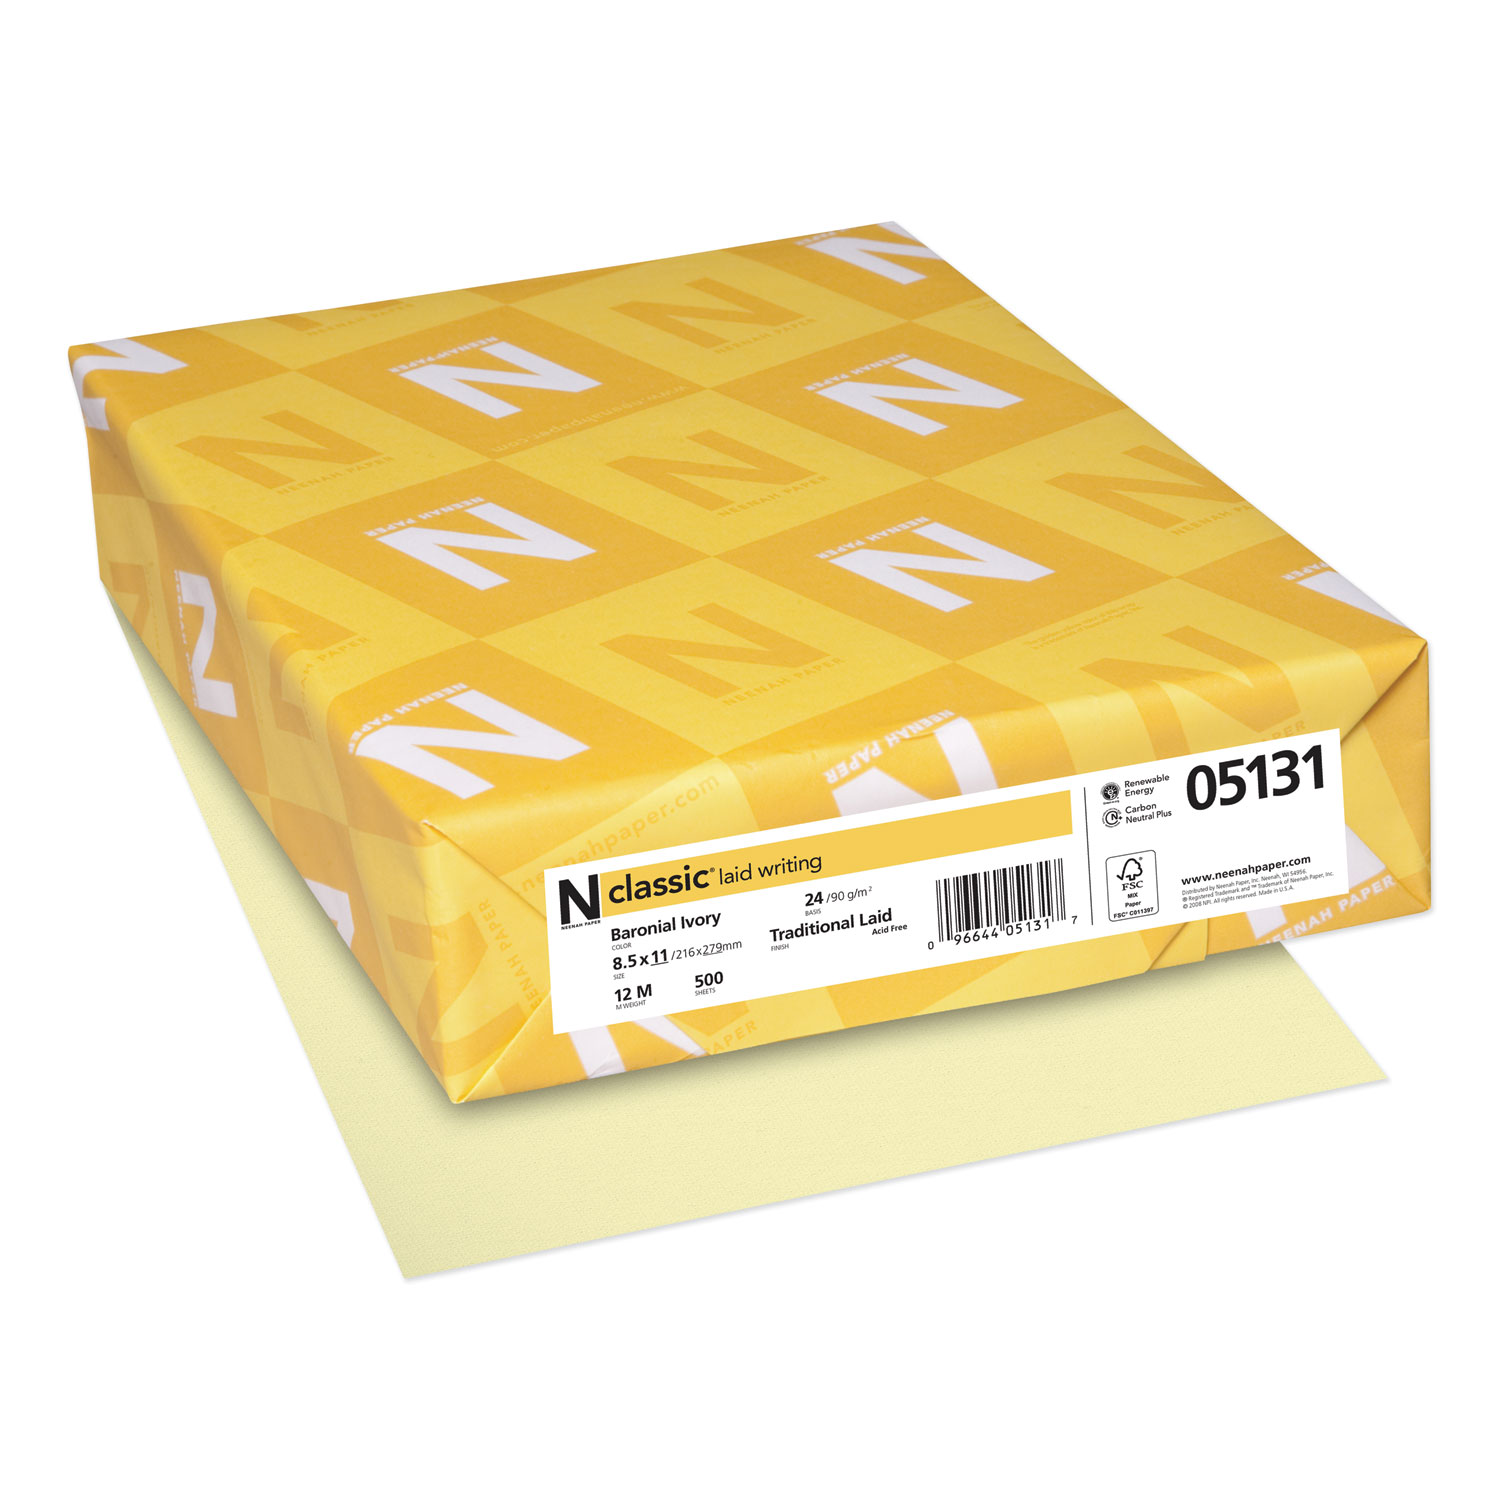  Neenah Paper 06551 CLASSIC Laid Stationery Writing Paper, 24 lb, 8.5 x 11, Baronial Ivory, 500/Ream (NEE06551) 